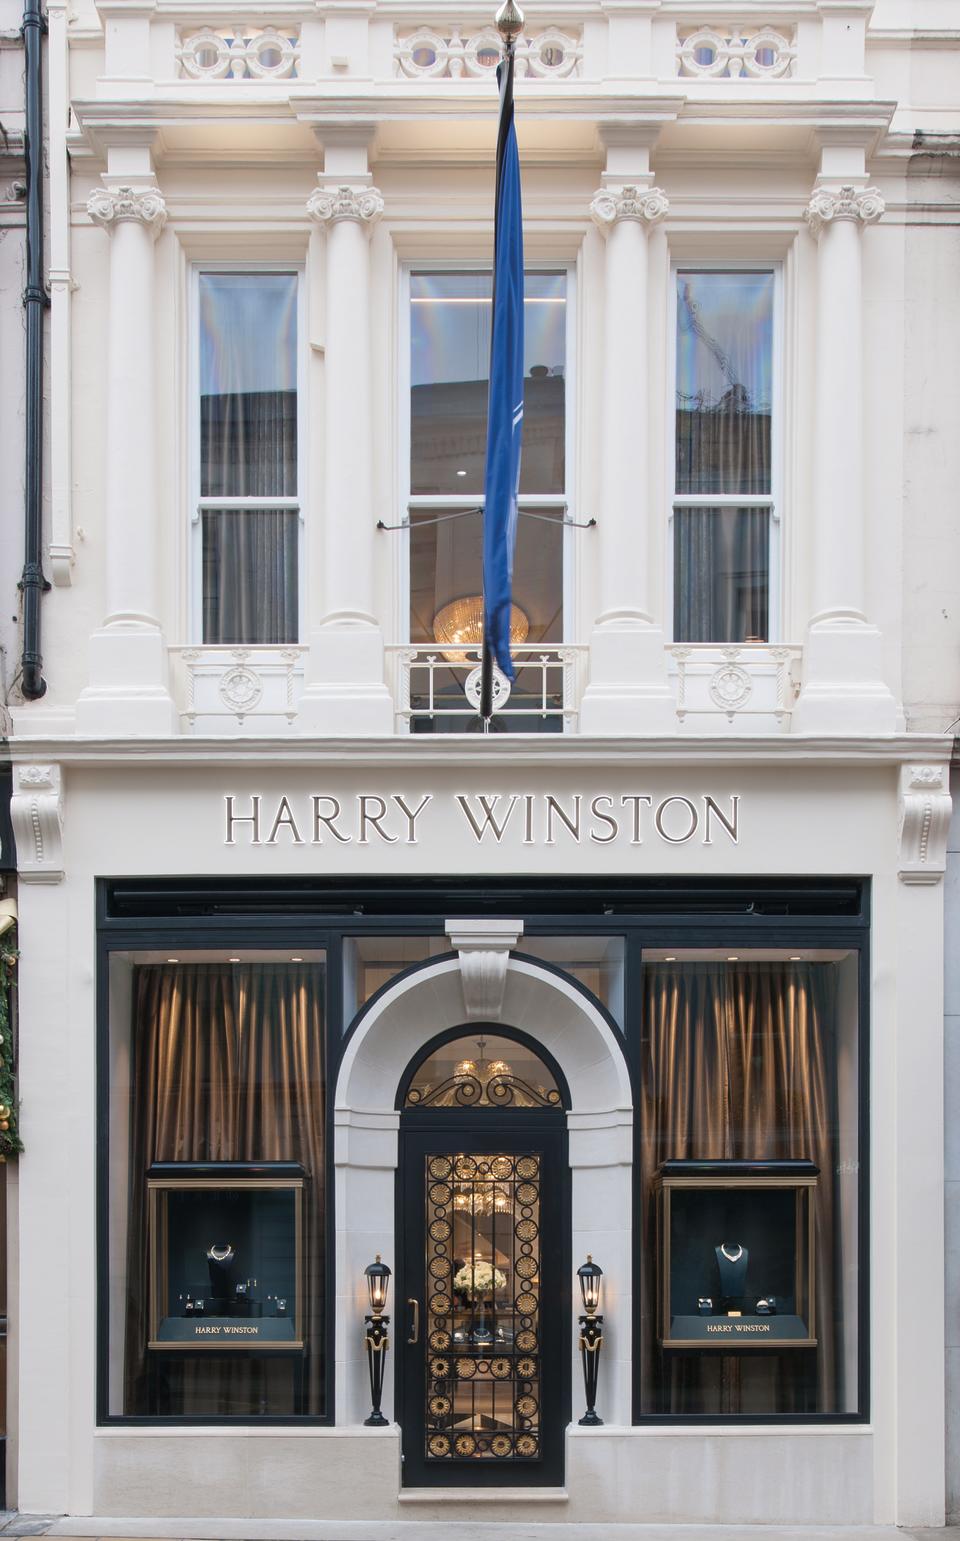 Swatch Group has purchased the Harry Winston building on New Bond Street in London in a deal worth 90 million Swiss francs.